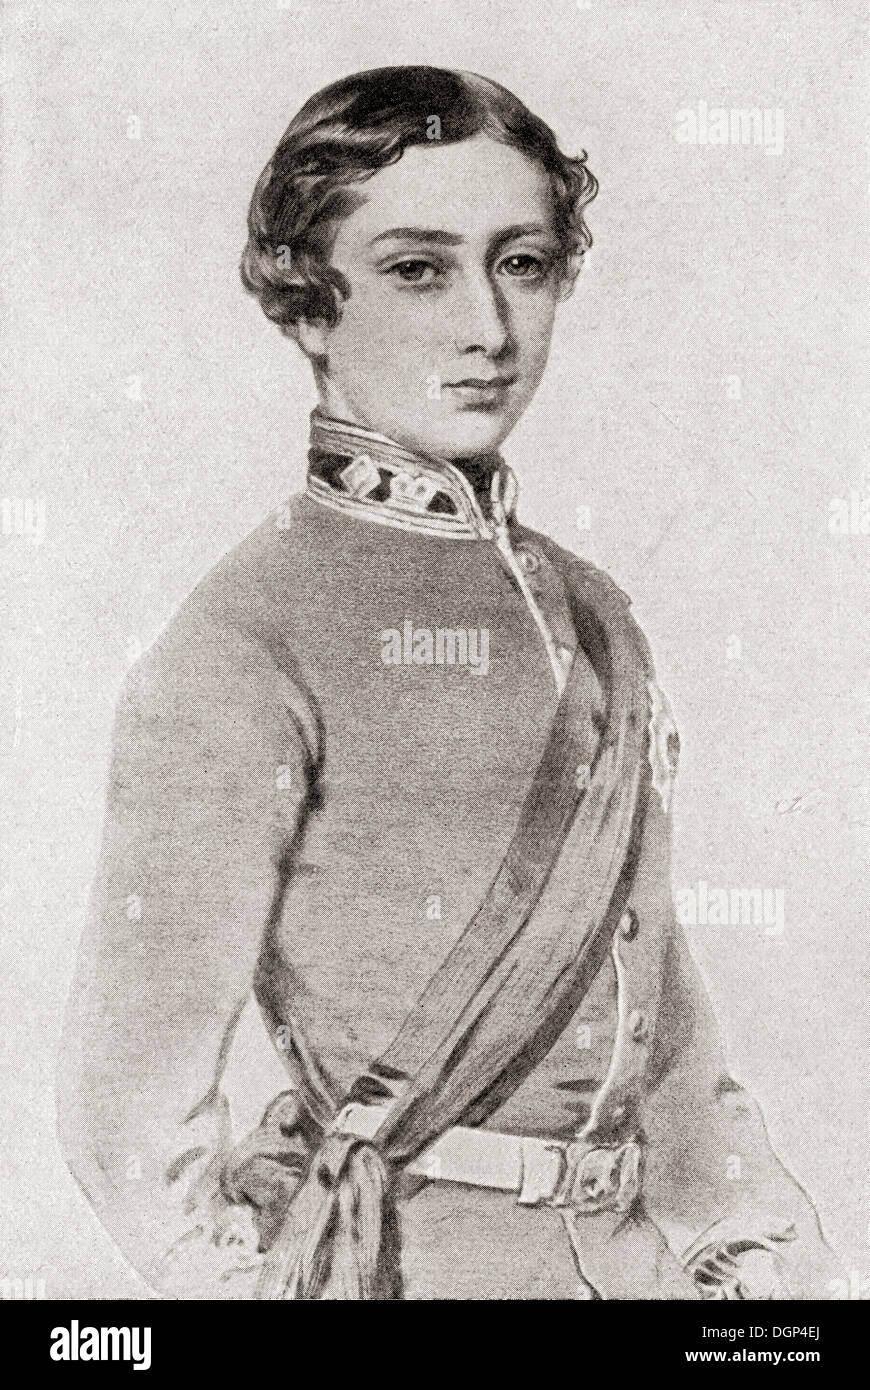 Albert Edward, Prince of Wales, 1841 – 1910, future King Edward VII, when appointed to the rank of colonel at age 18. Stock Photo